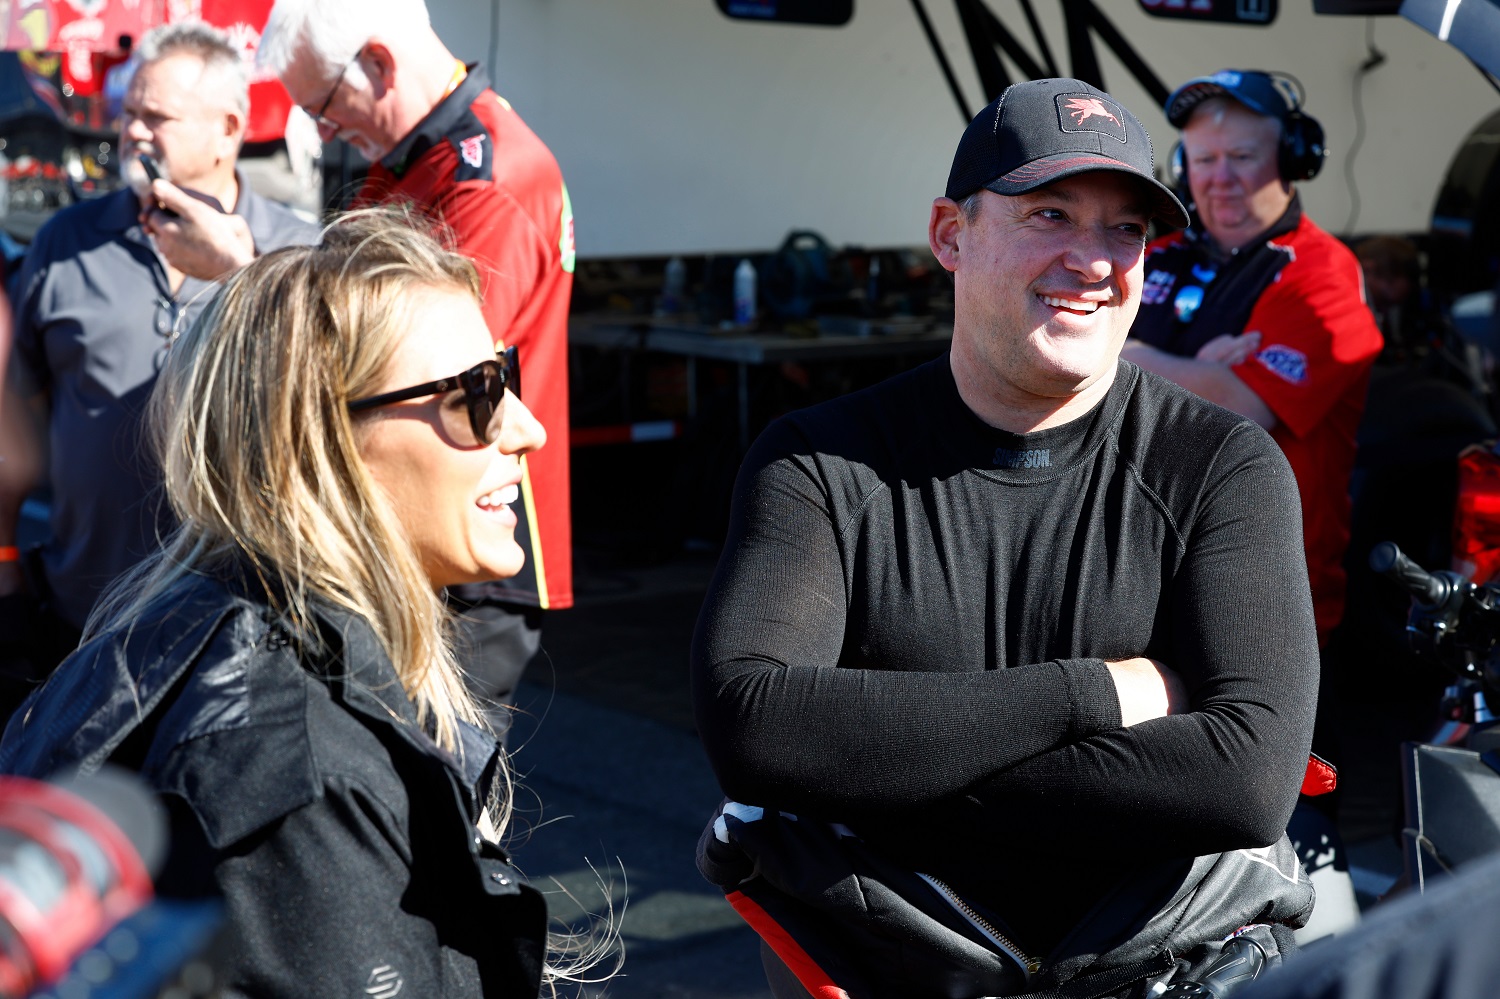 Tony Stewart talks with fans and his wife, Leah Pruett, during the NHRA Nevada Nationals on Oct. 28, 2022, at The Strip at Las Vegas Motor Speedway. | Jeff Speer/LVMS/Icon Sportswire via Getty Images